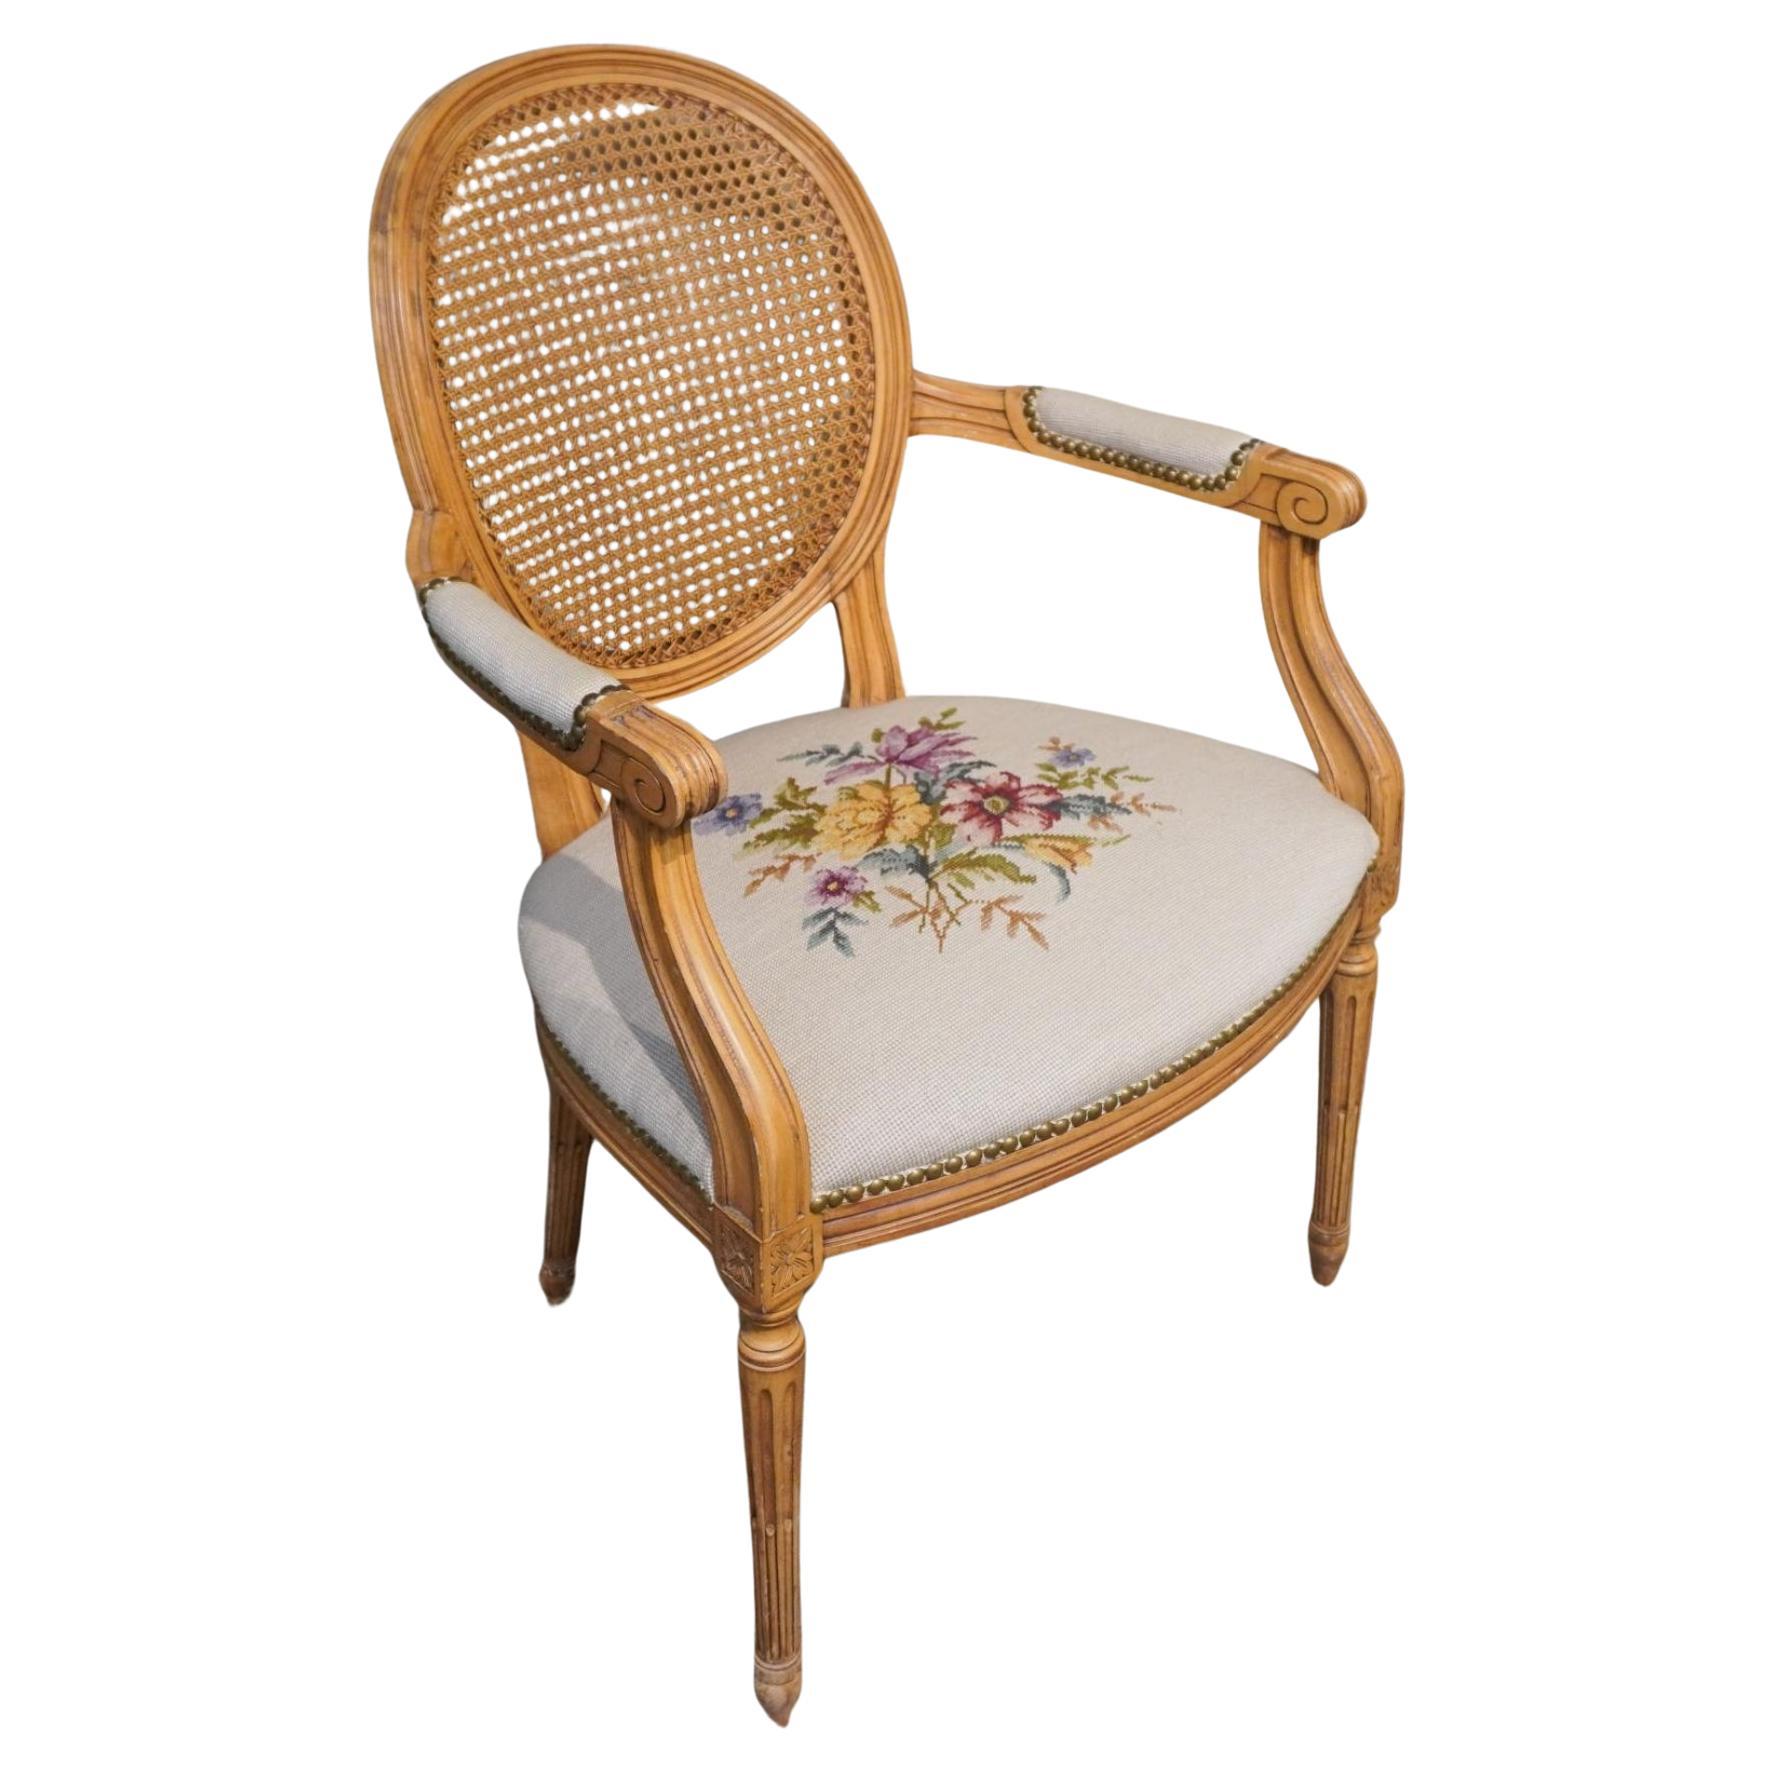 A Louis XVI Style Fruitwood, Needlepoint Upholstered Seat And Caned Back Fauteuil / Bergere Chair. Meaures 23.5